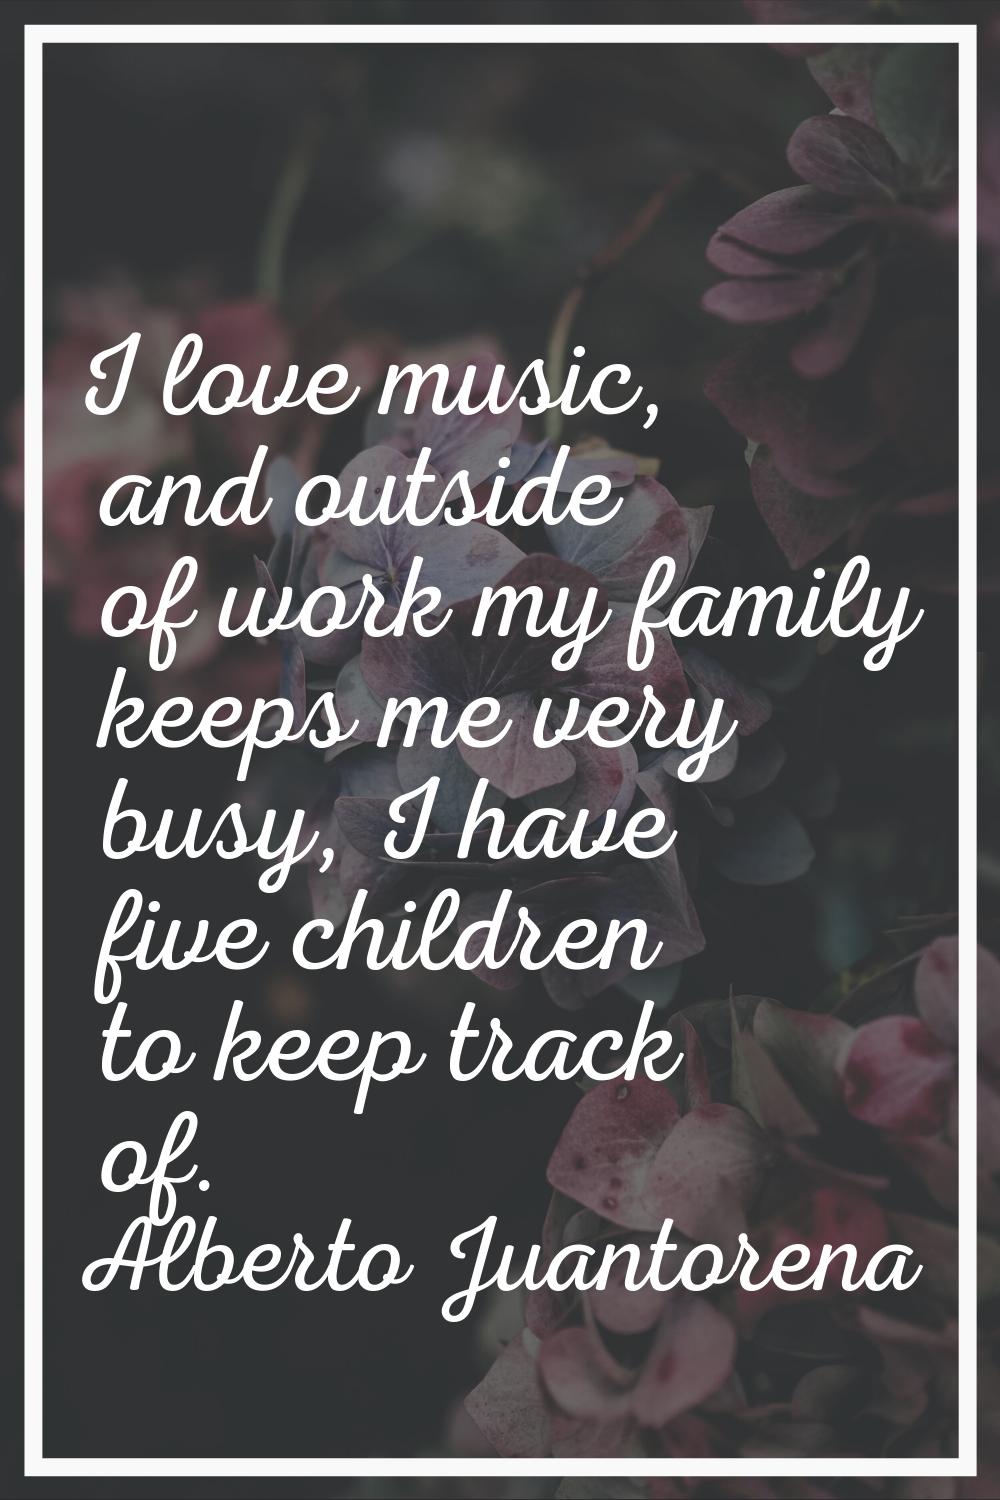 I love music, and outside of work my family keeps me very busy, I have five children to keep track 